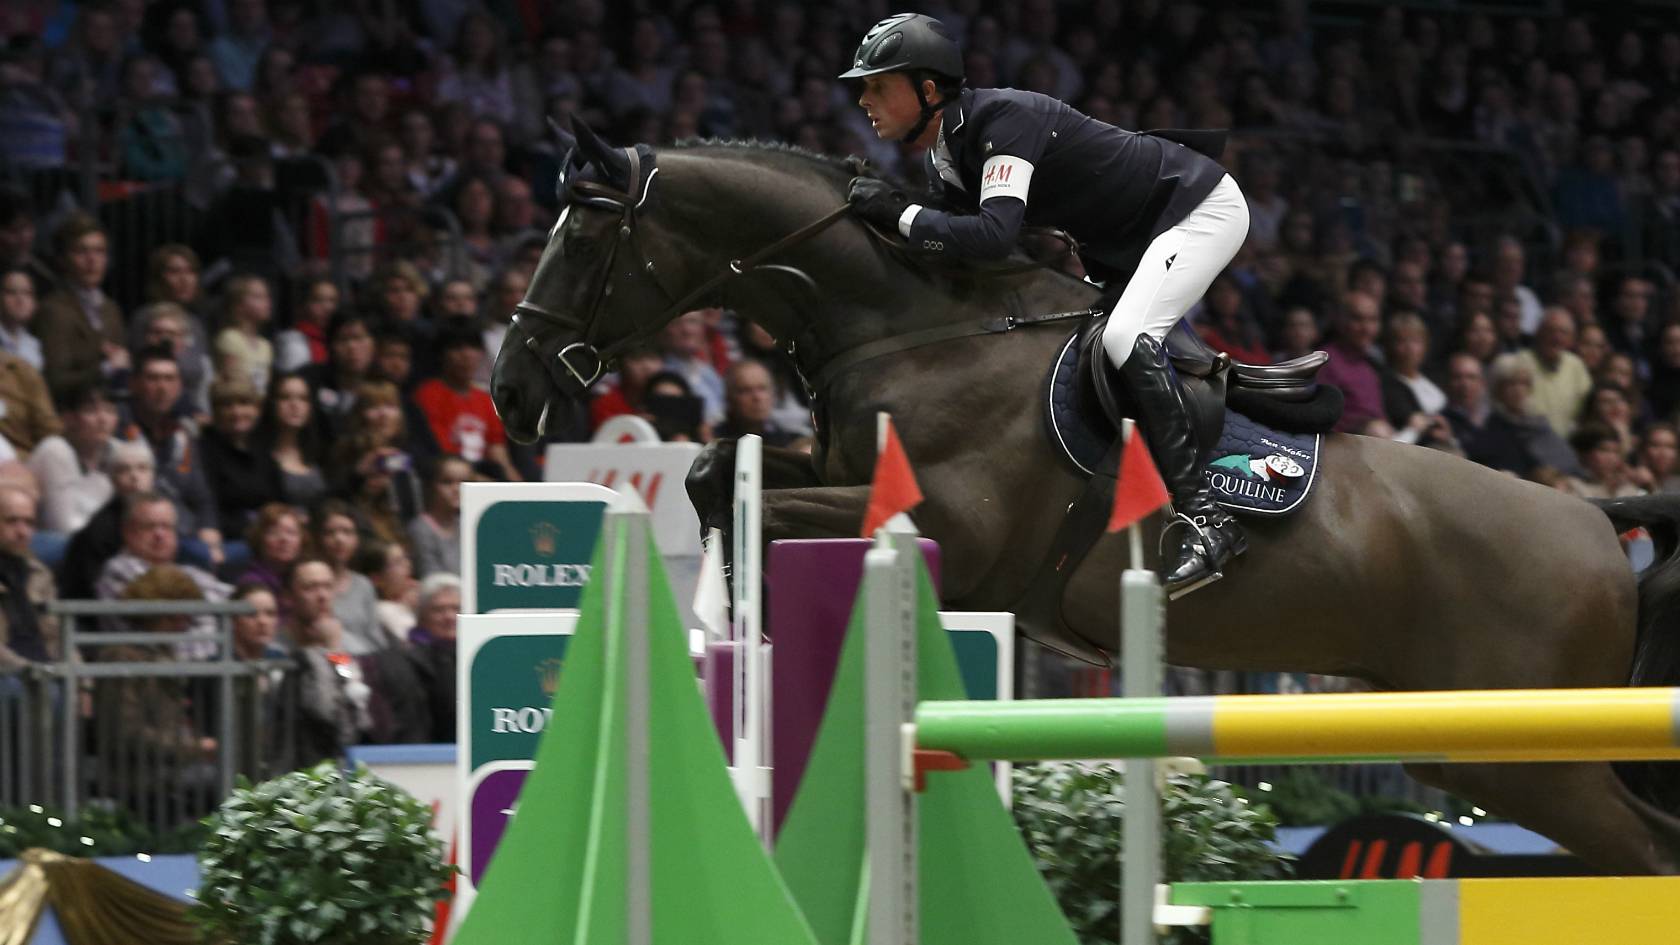 Catch Up Show Jumping World Cup Live BBC Sport